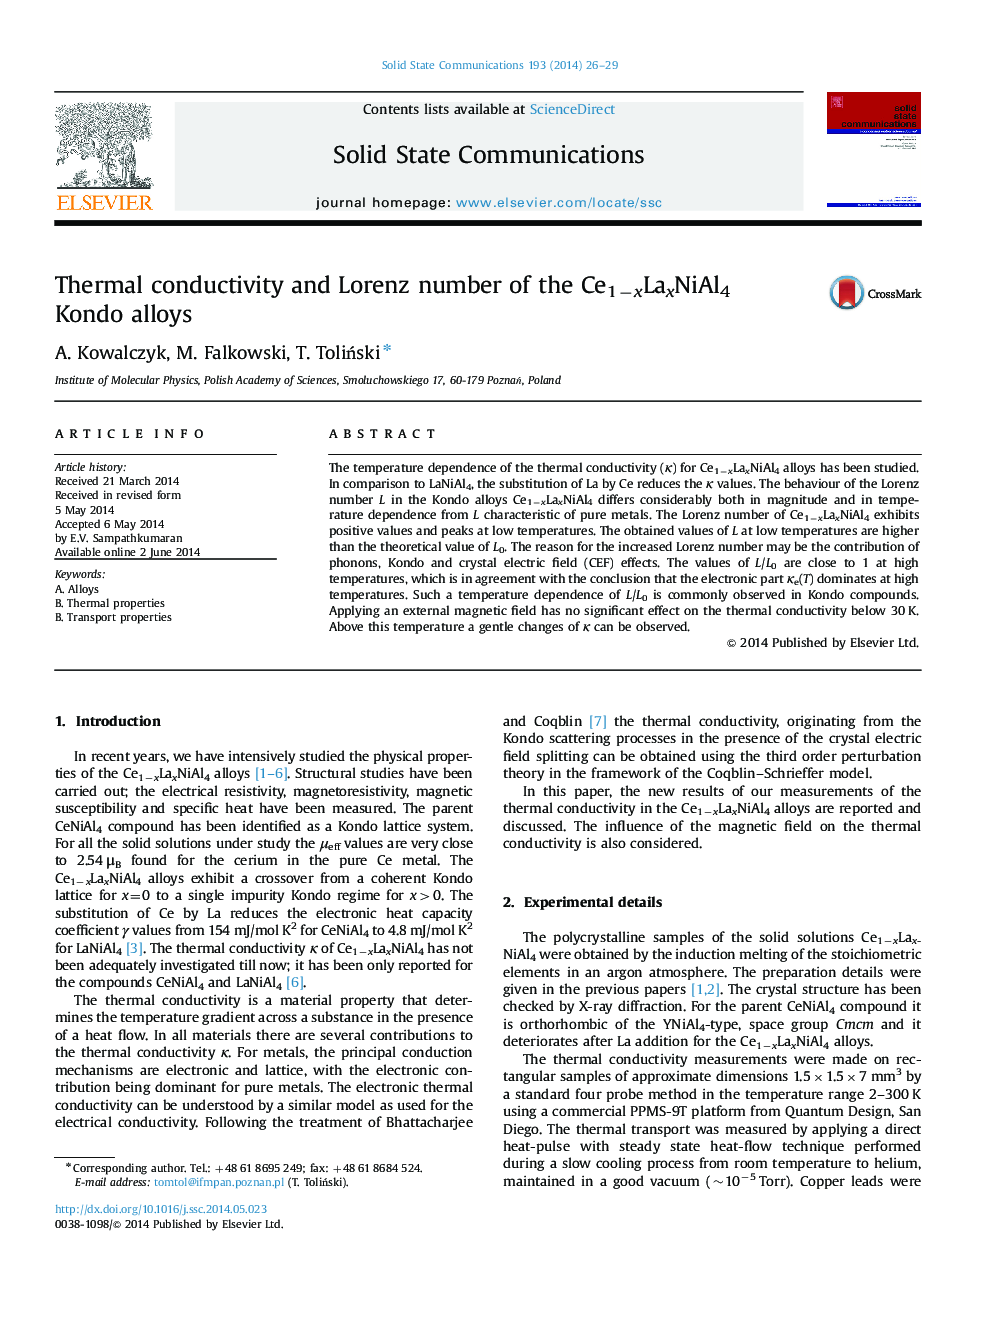 Thermal conductivity and Lorenz number of the Ce1−xLaxNiAl4 Kondo alloys